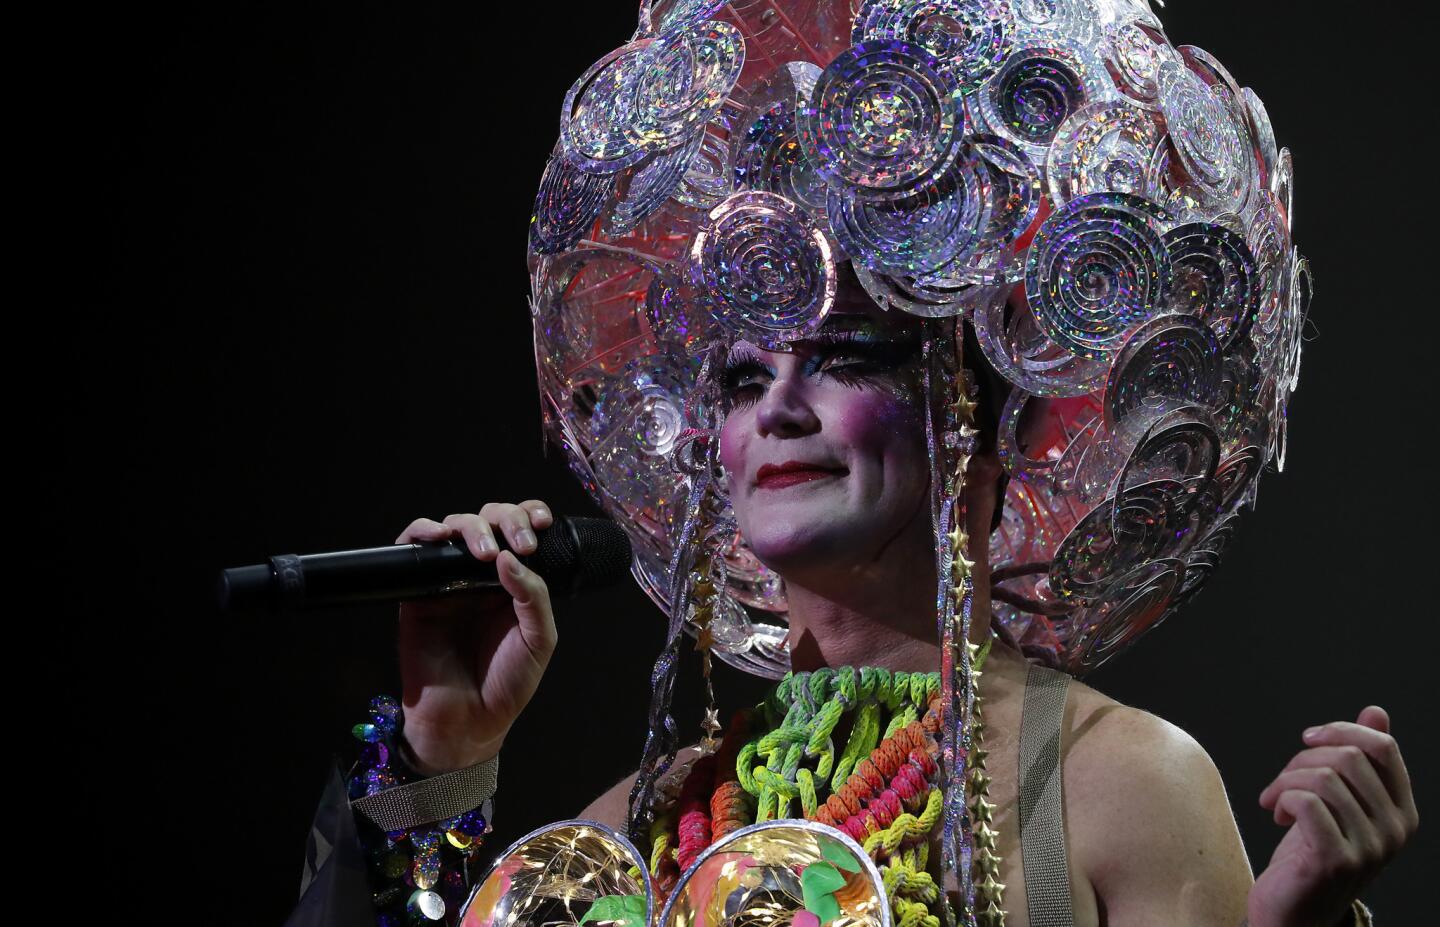 Taylor Mac performs "A 24-Decade History of Popular Music" at the Theatre at Ace Hotel in Los Angeles. The costumes - a new one for each decade - are by a designer known as Machine Dazzle. This look made its appearance in the final quarter of the the cycle, on March 24.